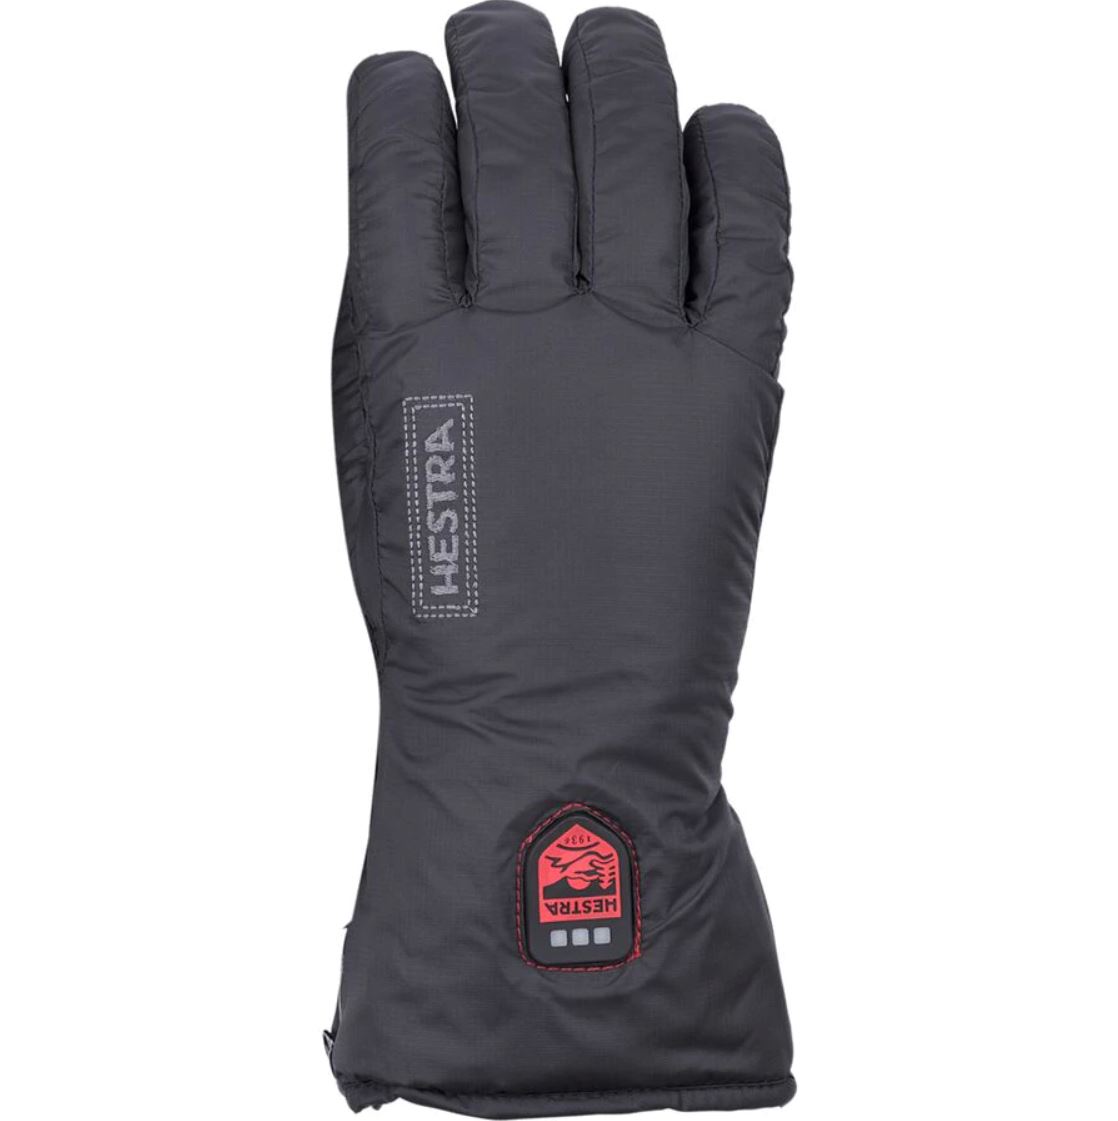 Splurge Gifts for Outdoor Lovers - Hestra Heated Gloves